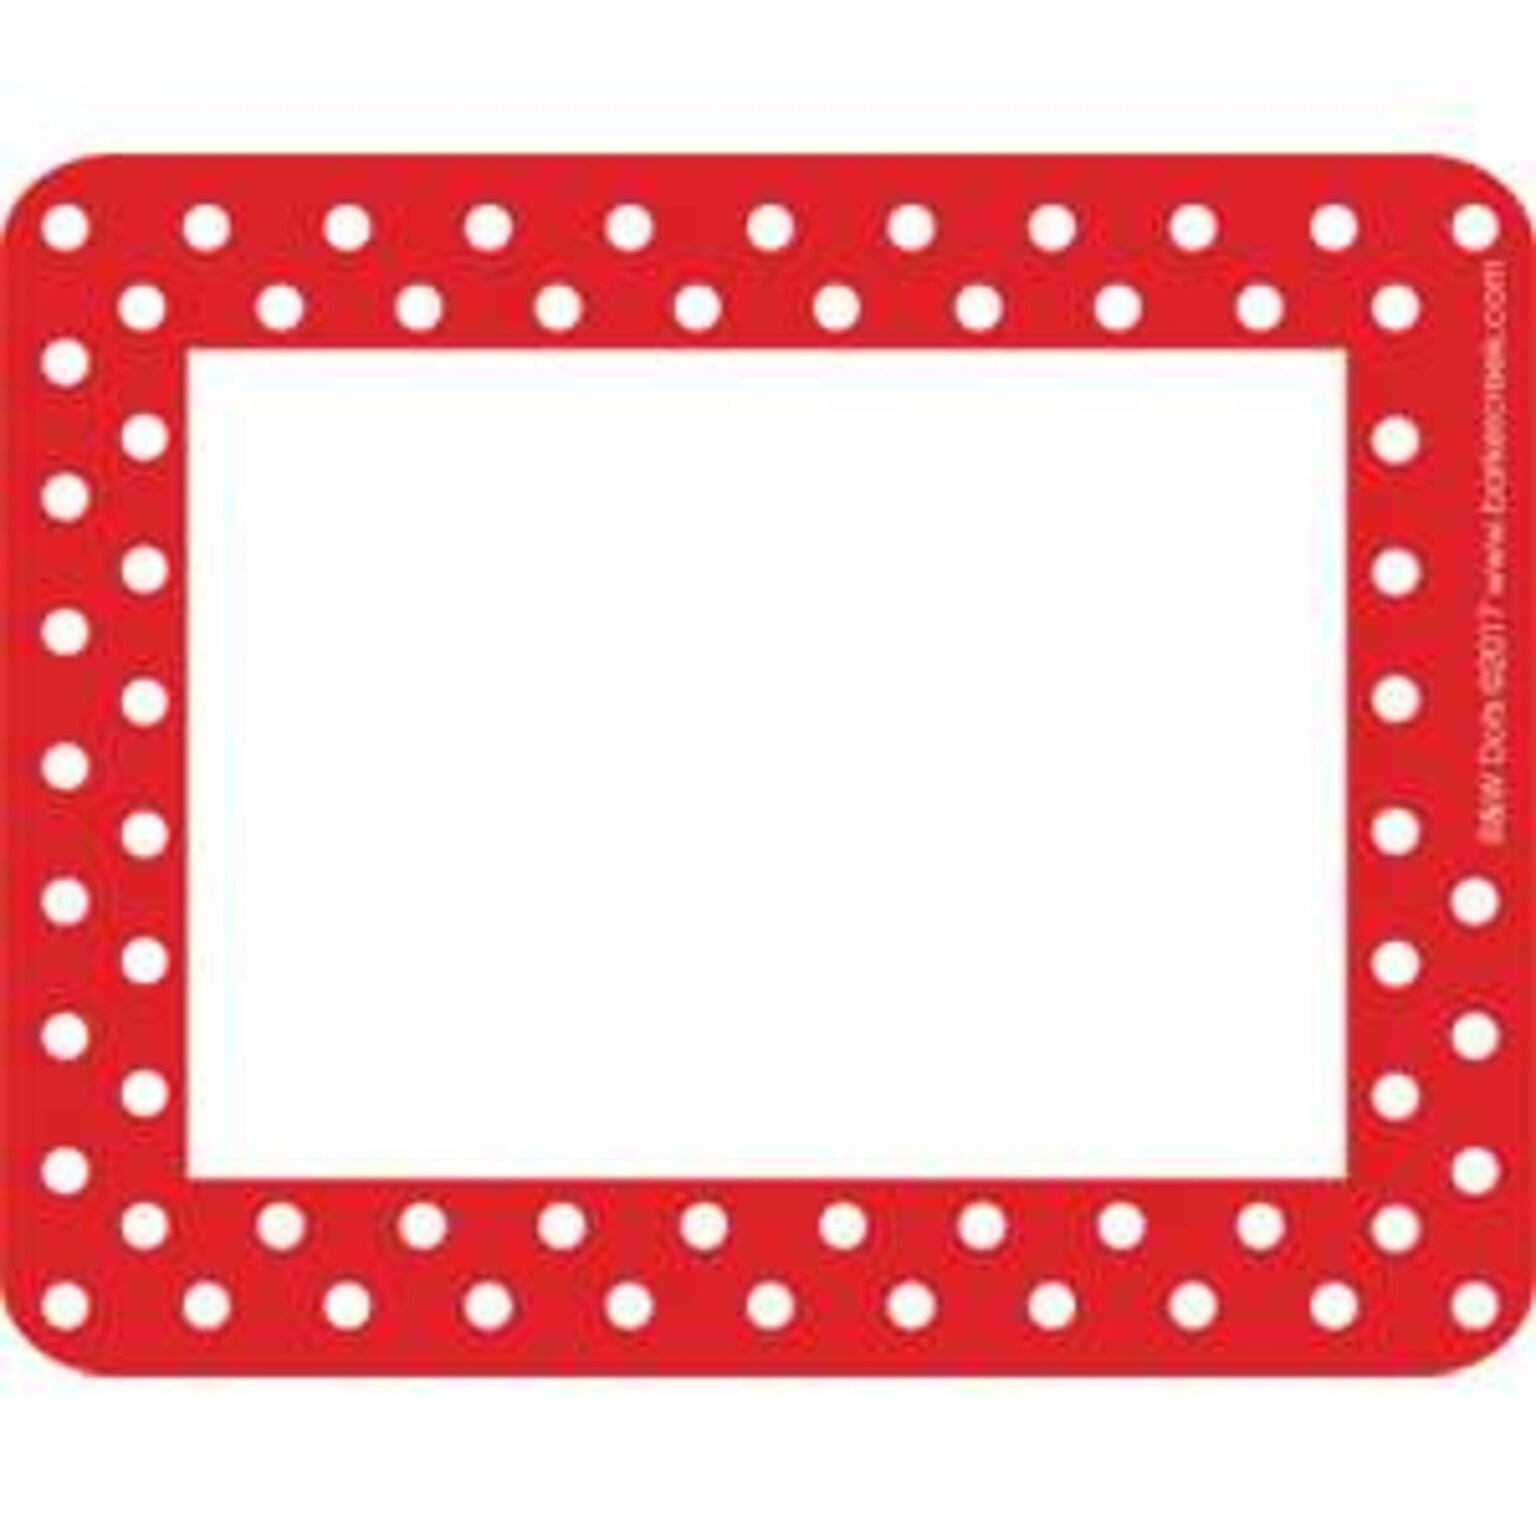 Barker Creek Red & White Dot Name Tags, Self-Adhesive Labels, 3 1/2 x 2 3/4, 90/Pack (BC3744)